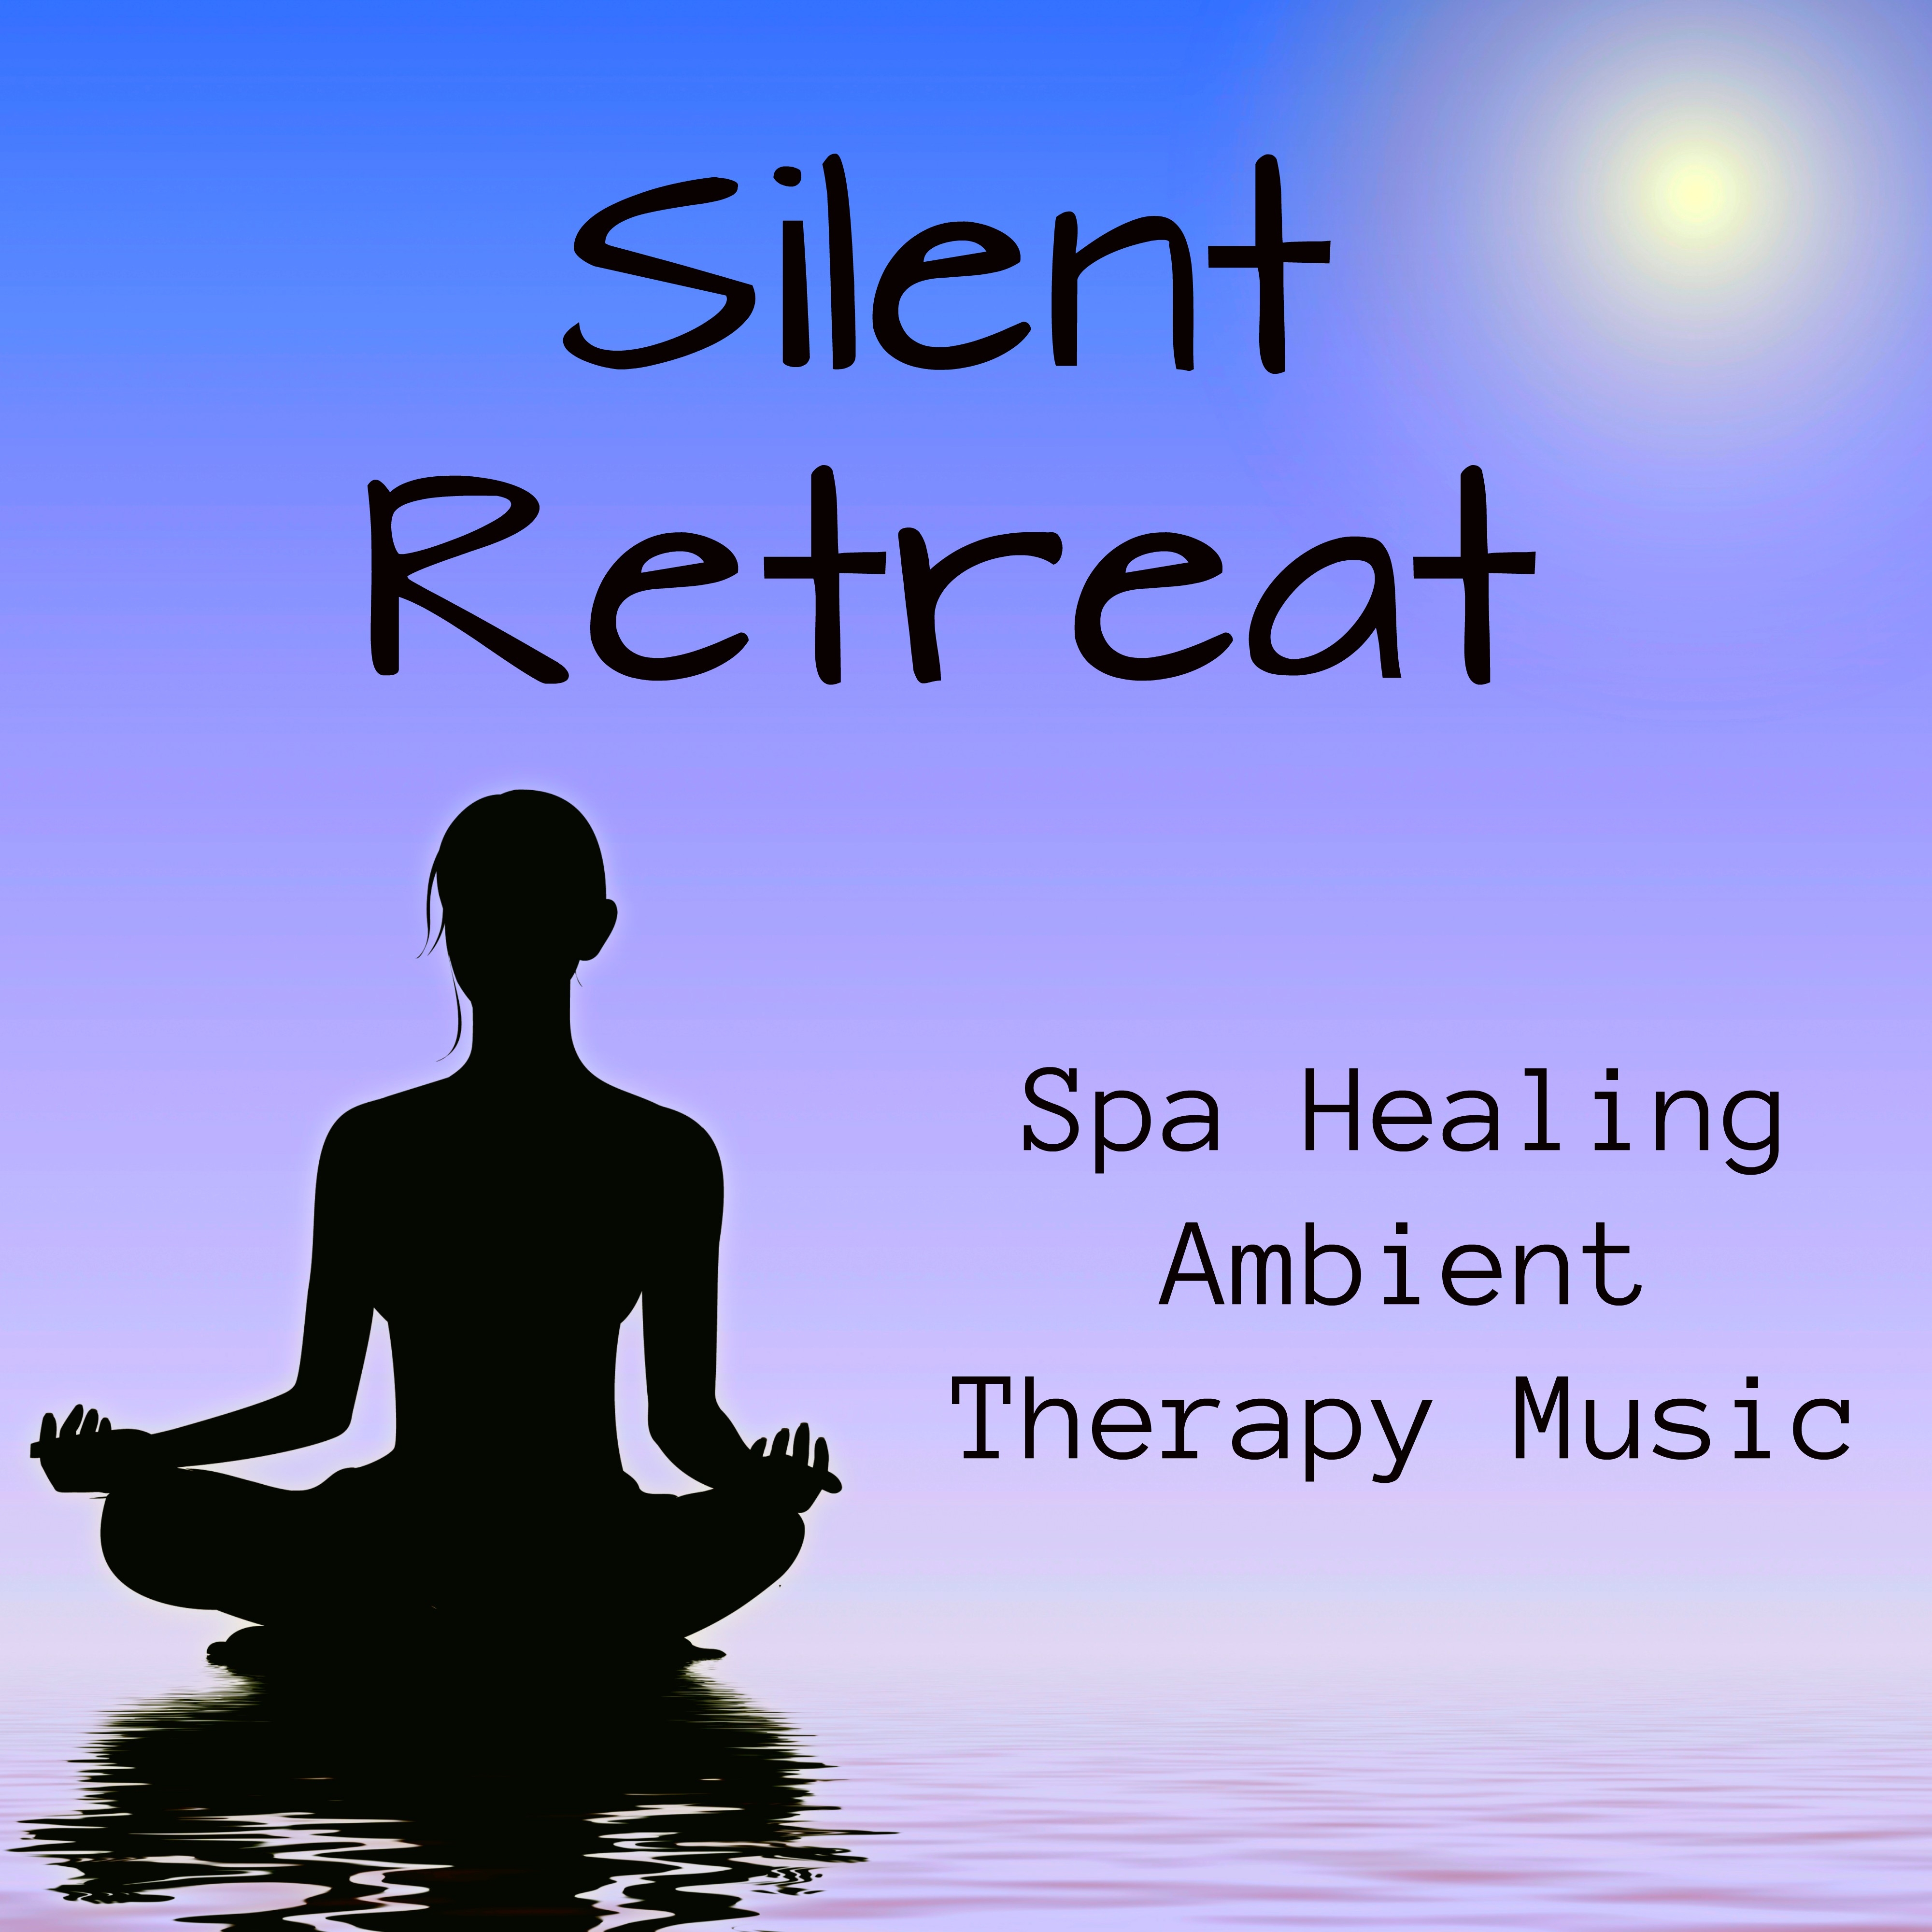 Silent Retreat - Spa Healing Ambient Therapy Music for Zen Sleep Meditation with Natural Instrumental New Age Sounds